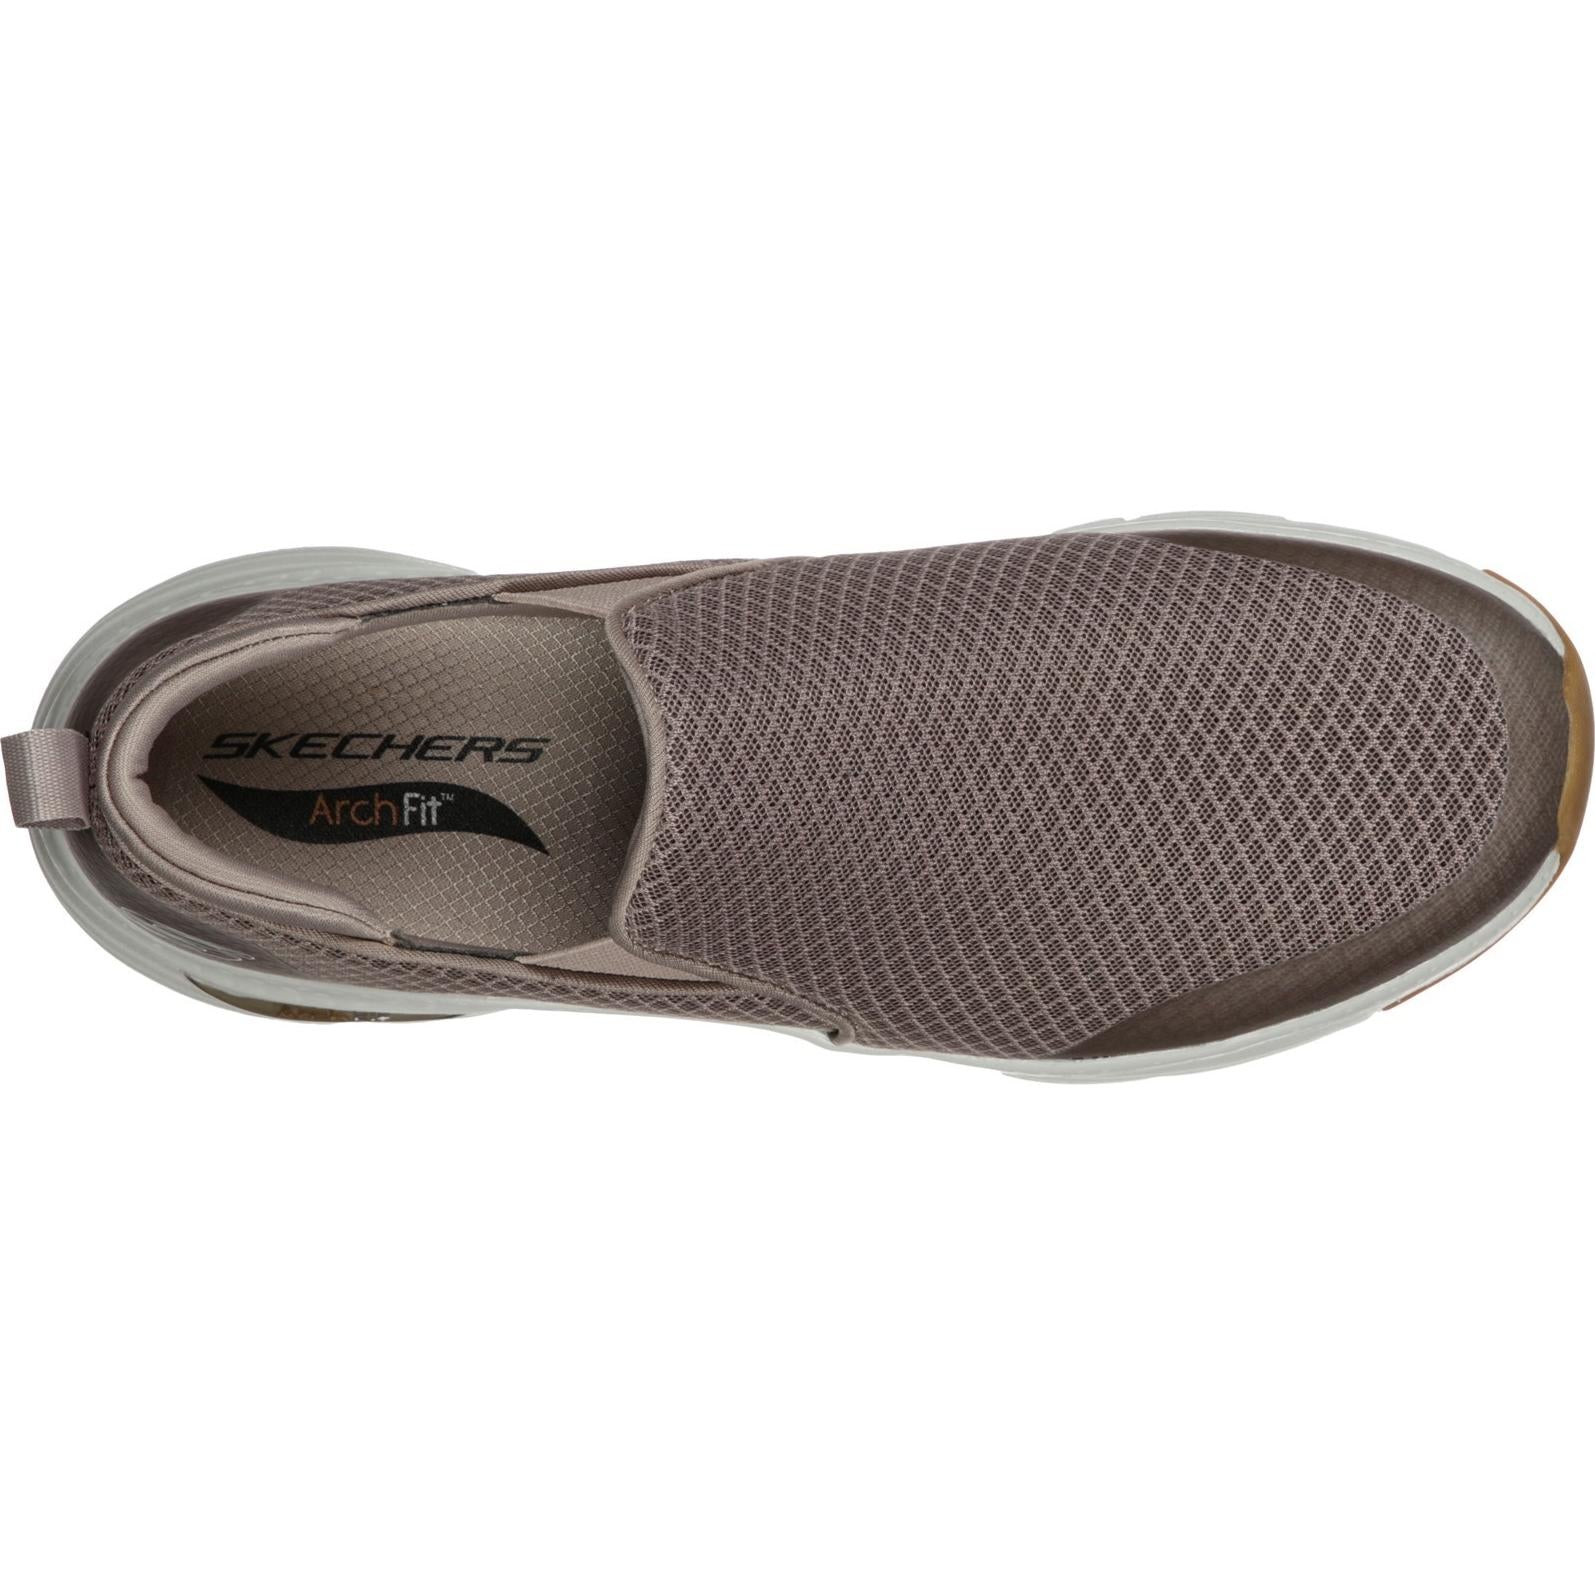 Skechers Arch Fit Banlin Slip On Sports Trainers